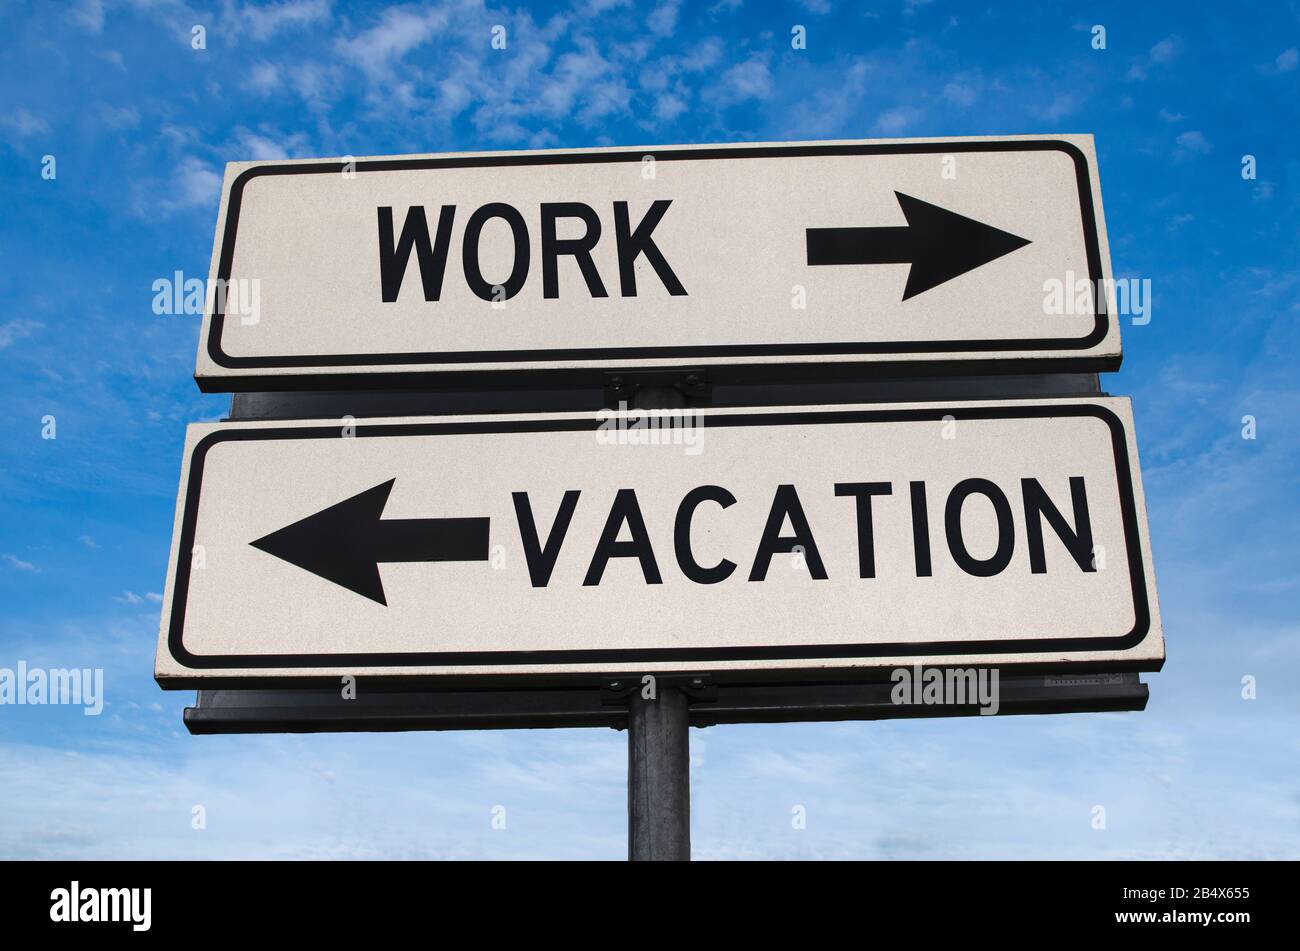 Work vs vacation. White two street signs with arrow on metal pole with word. Directional road. Crossroads Road Sign, Two Arrow. Blue sky background. Stock Photo